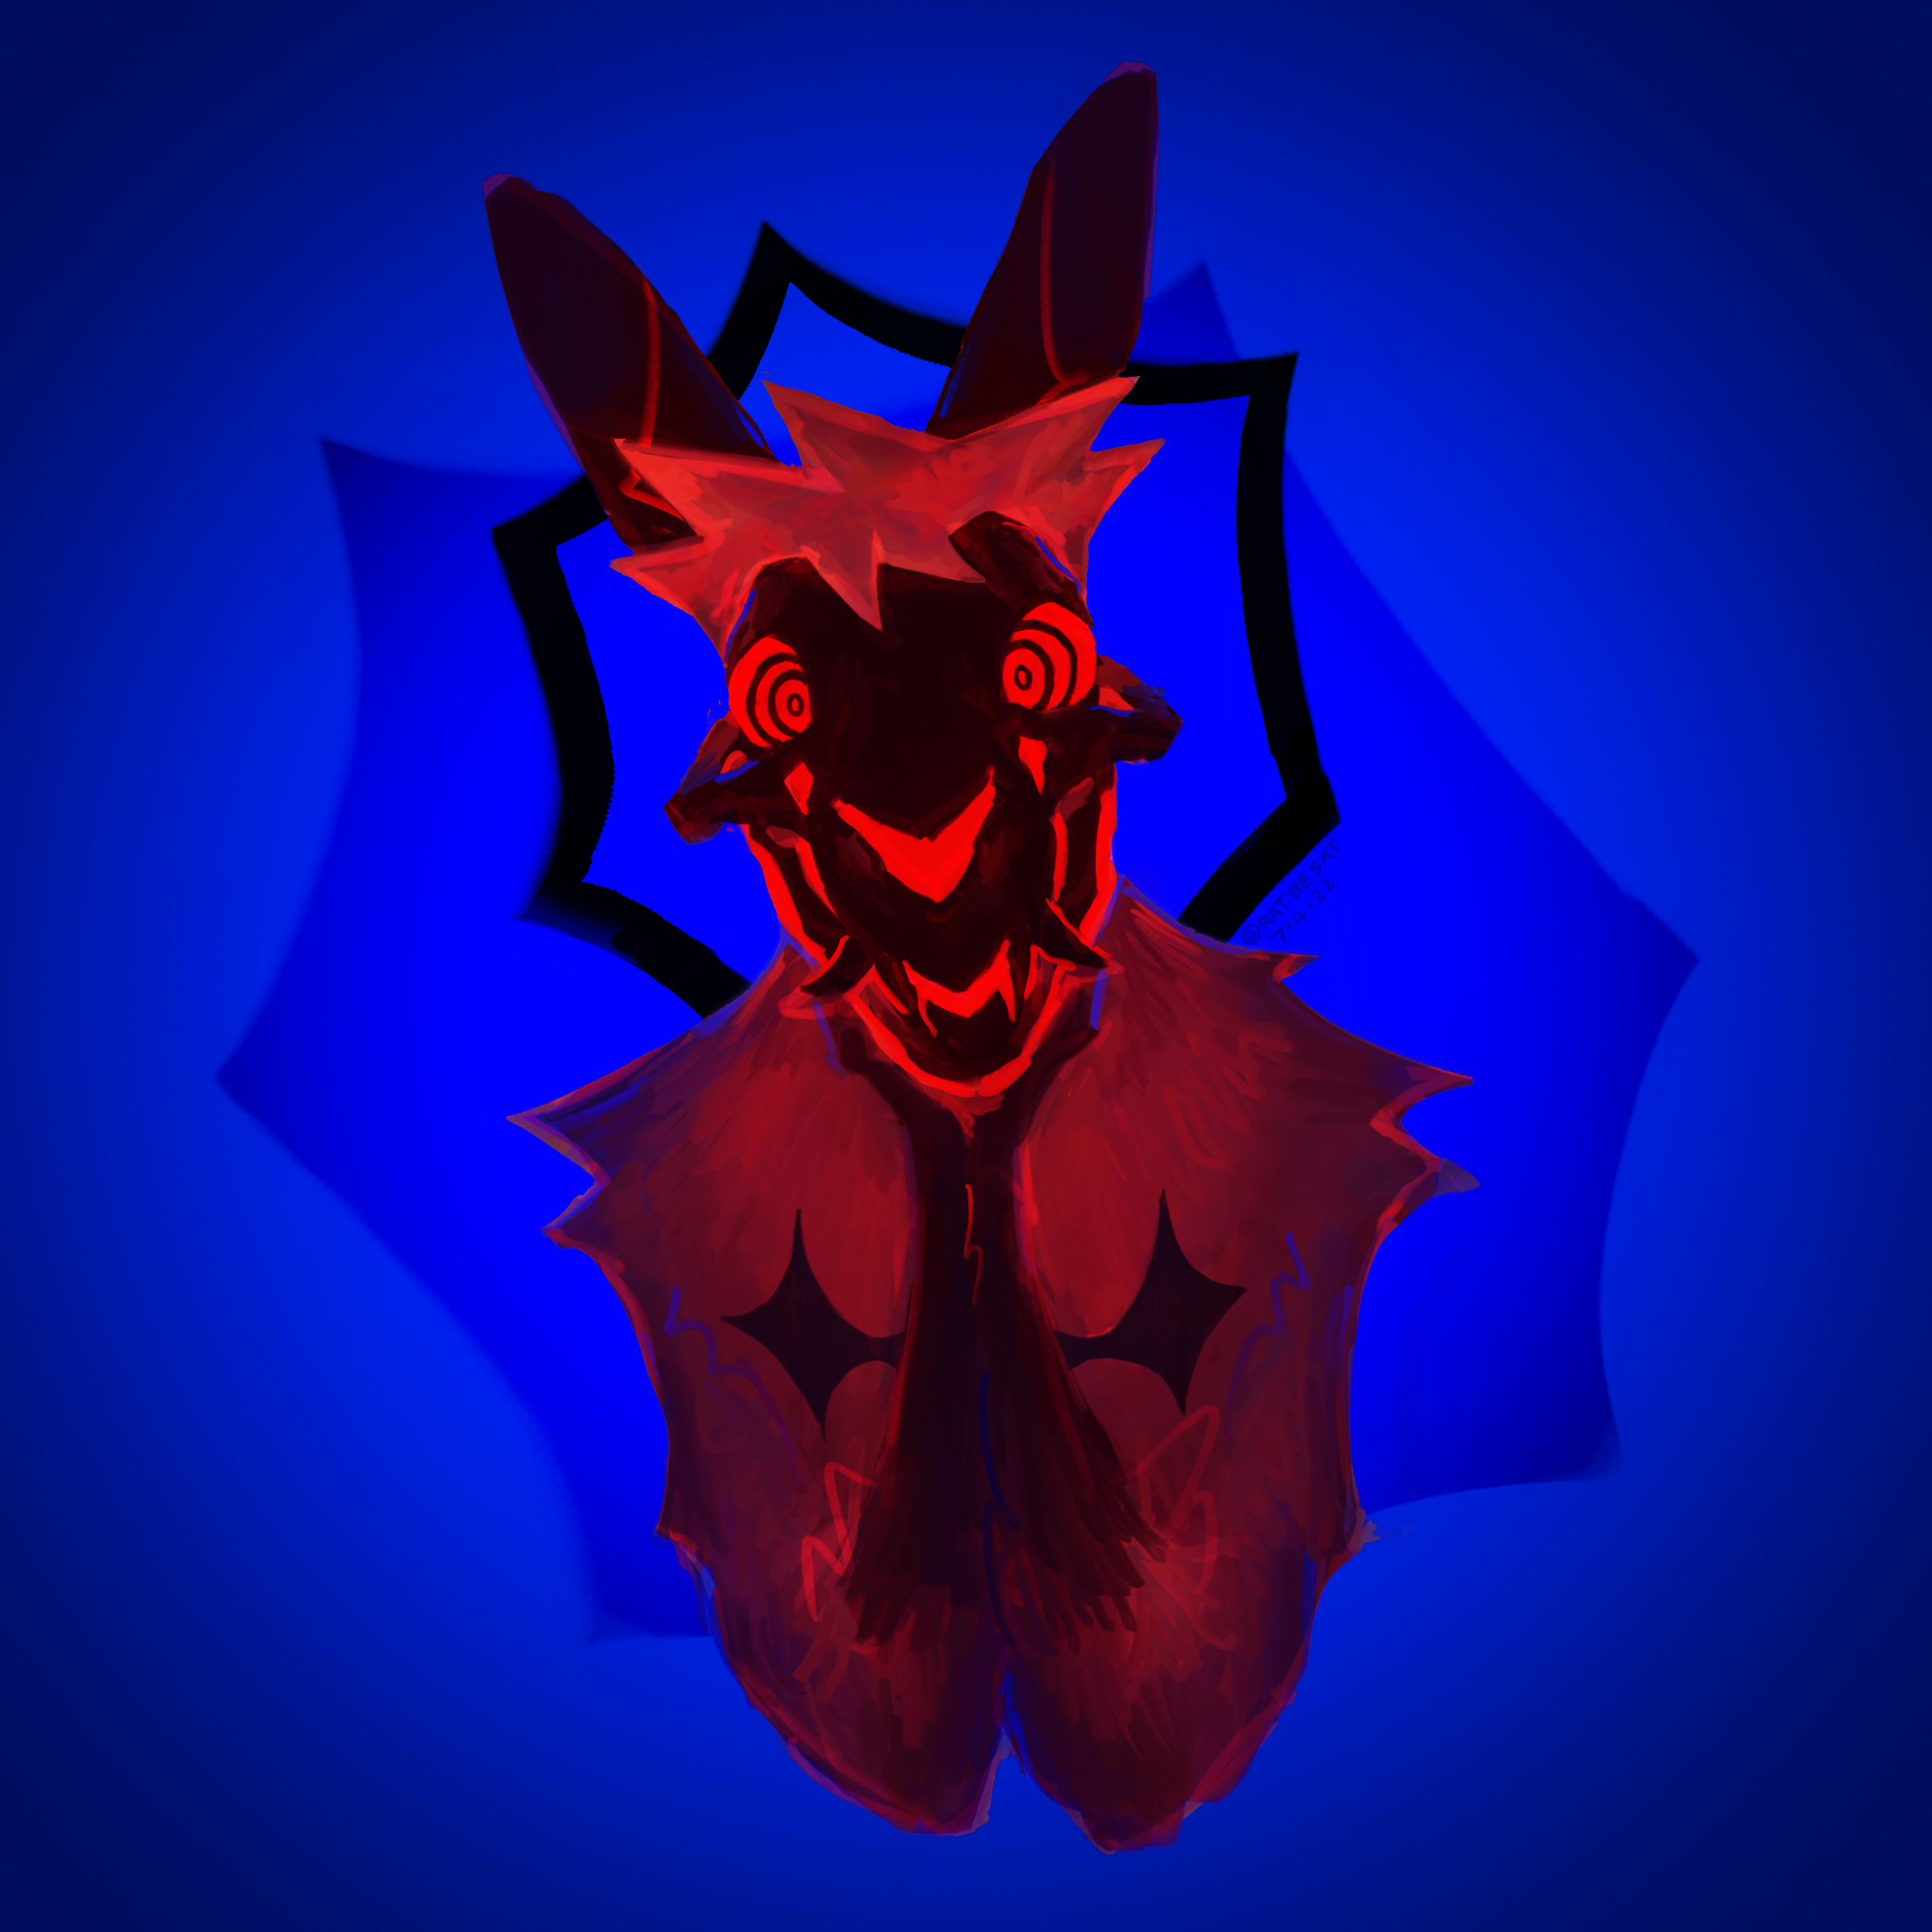 Painted portrait of an anthro rat-cat colored in red on a blue background